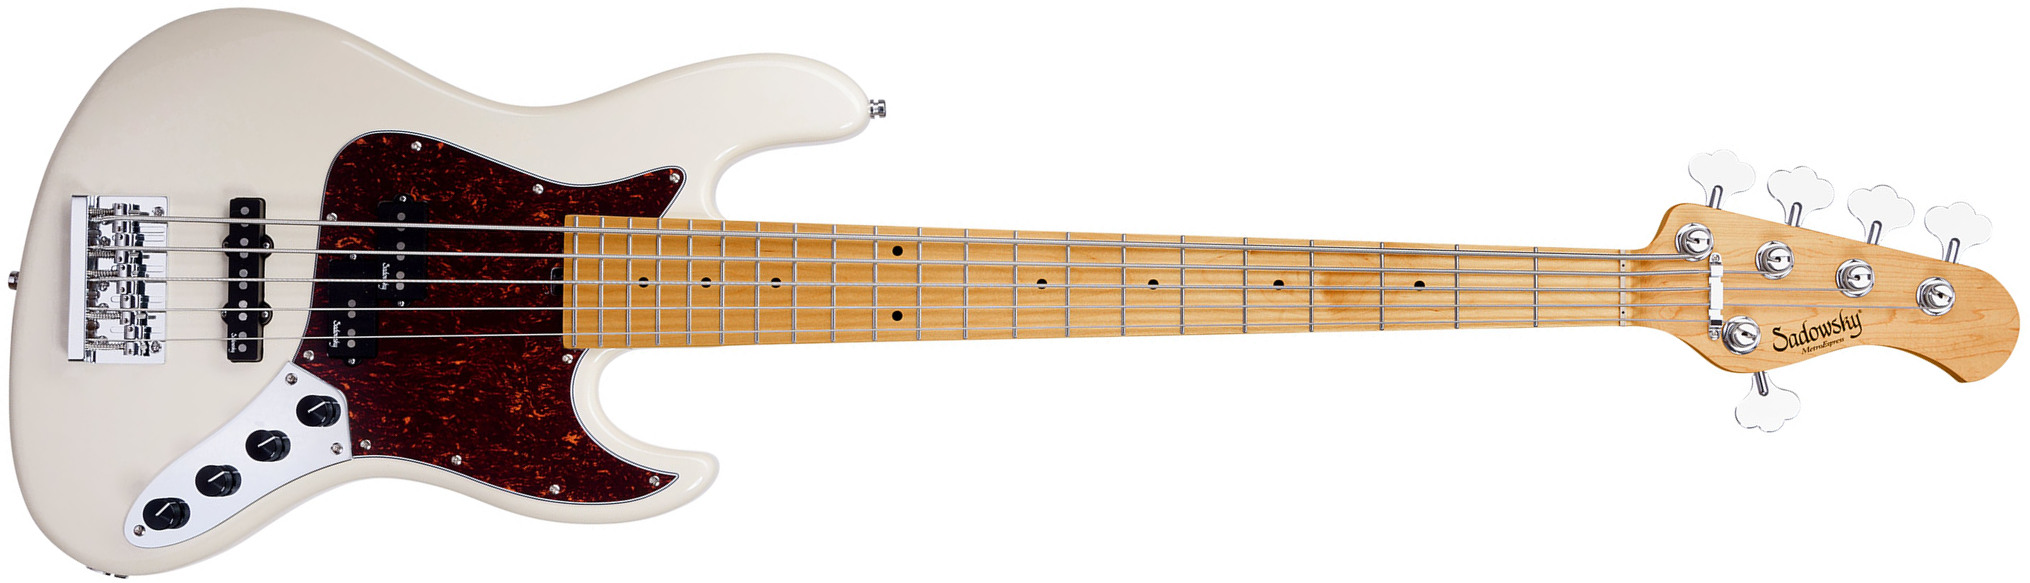 Sadowsky Hybrid Pj Bass 21 Fret 5c Metroexpress V2 Mn - Olympic White - Solid body electric bass - Main picture